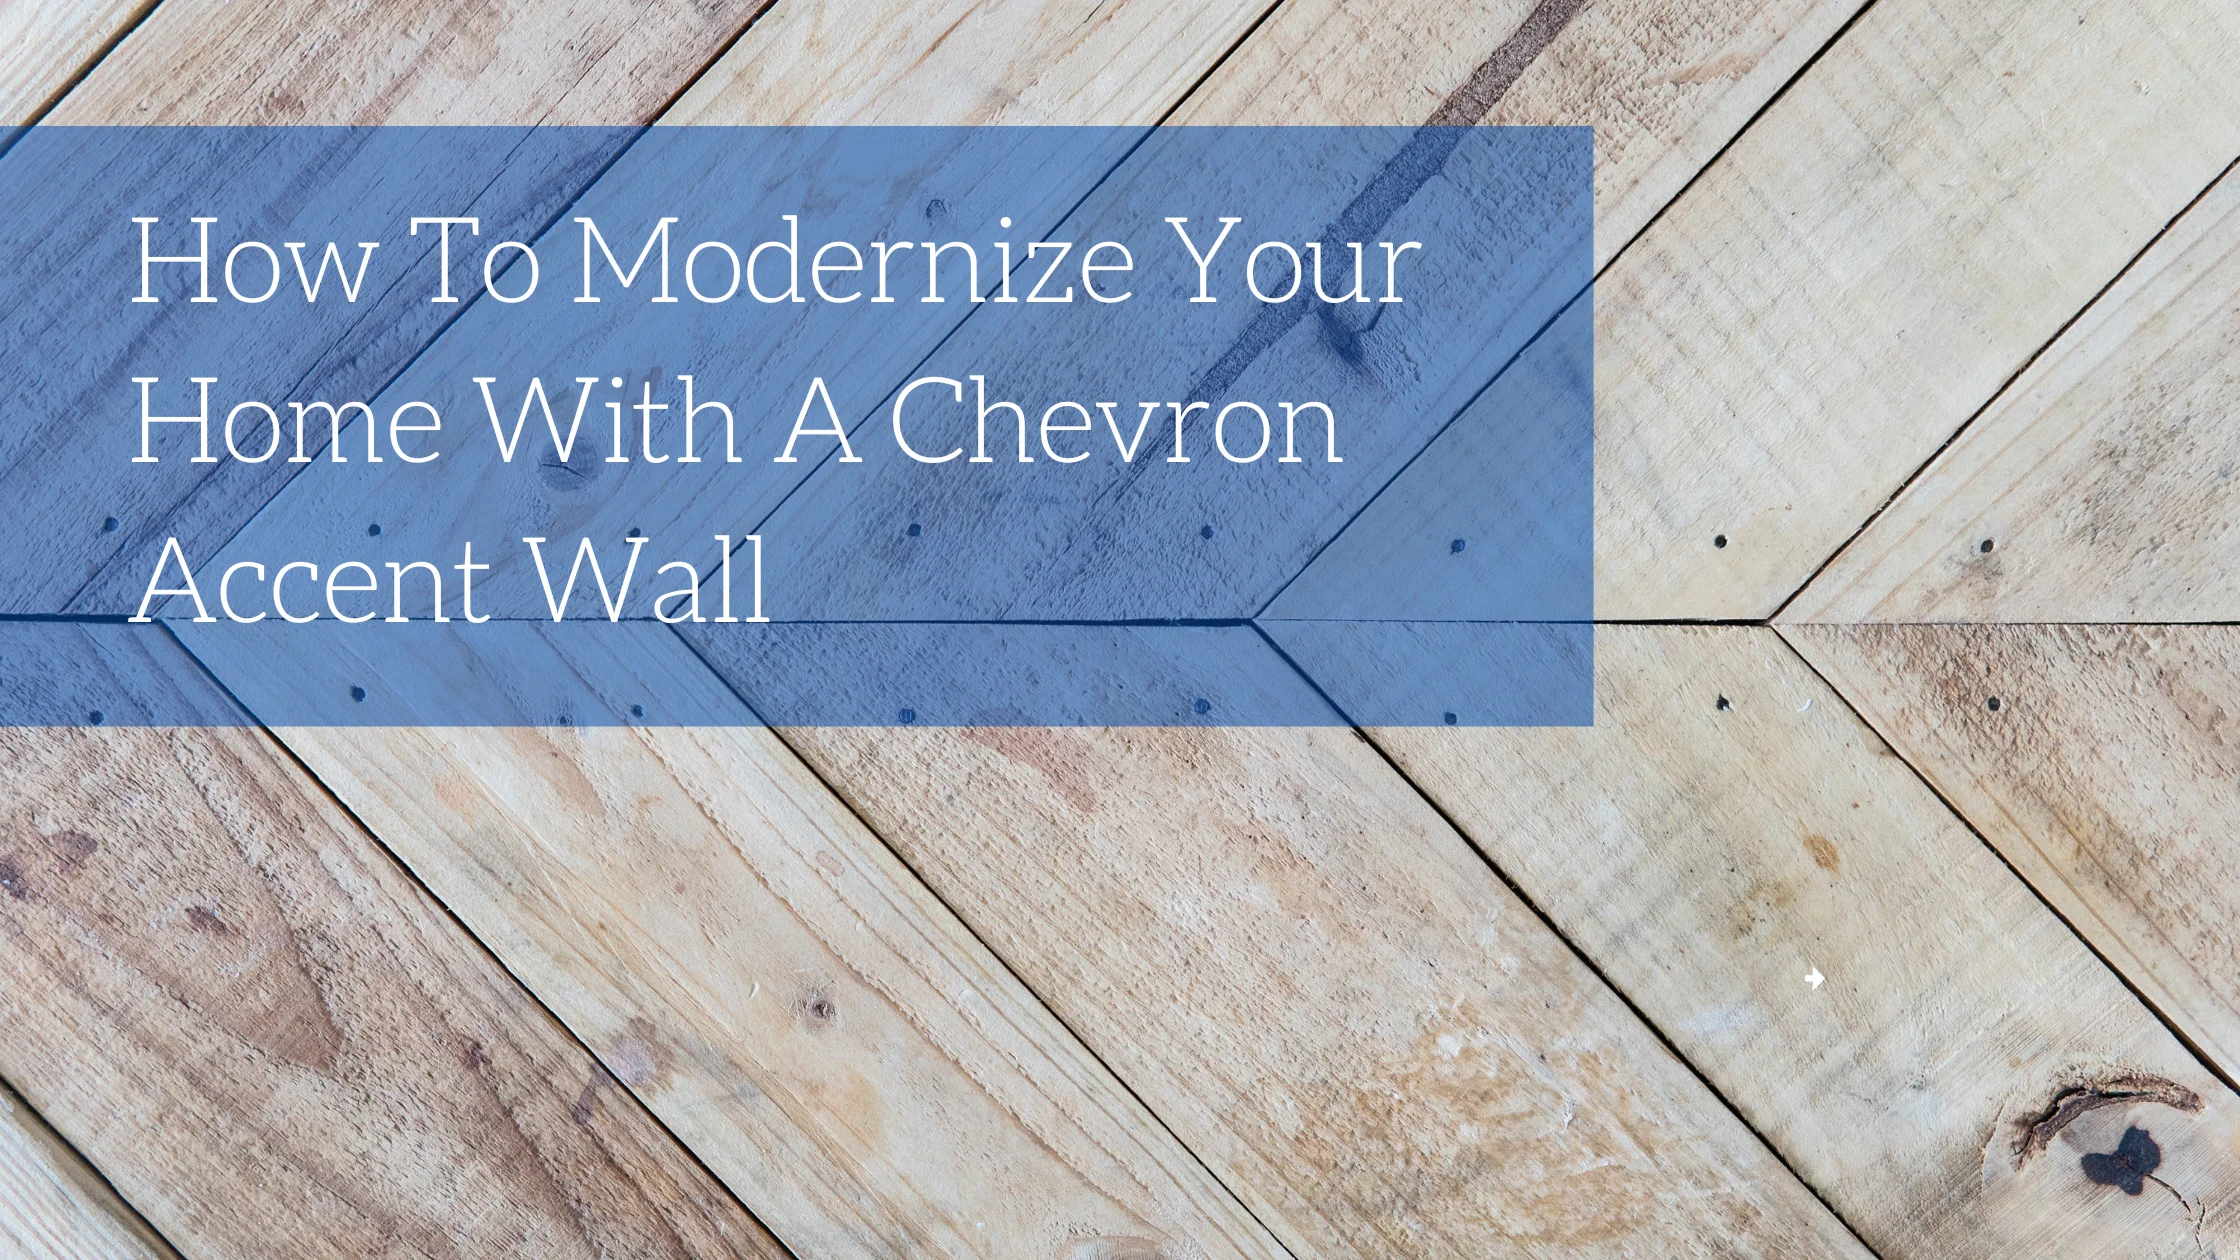 How To Modernize Your Home With A Chevron Accent Wall